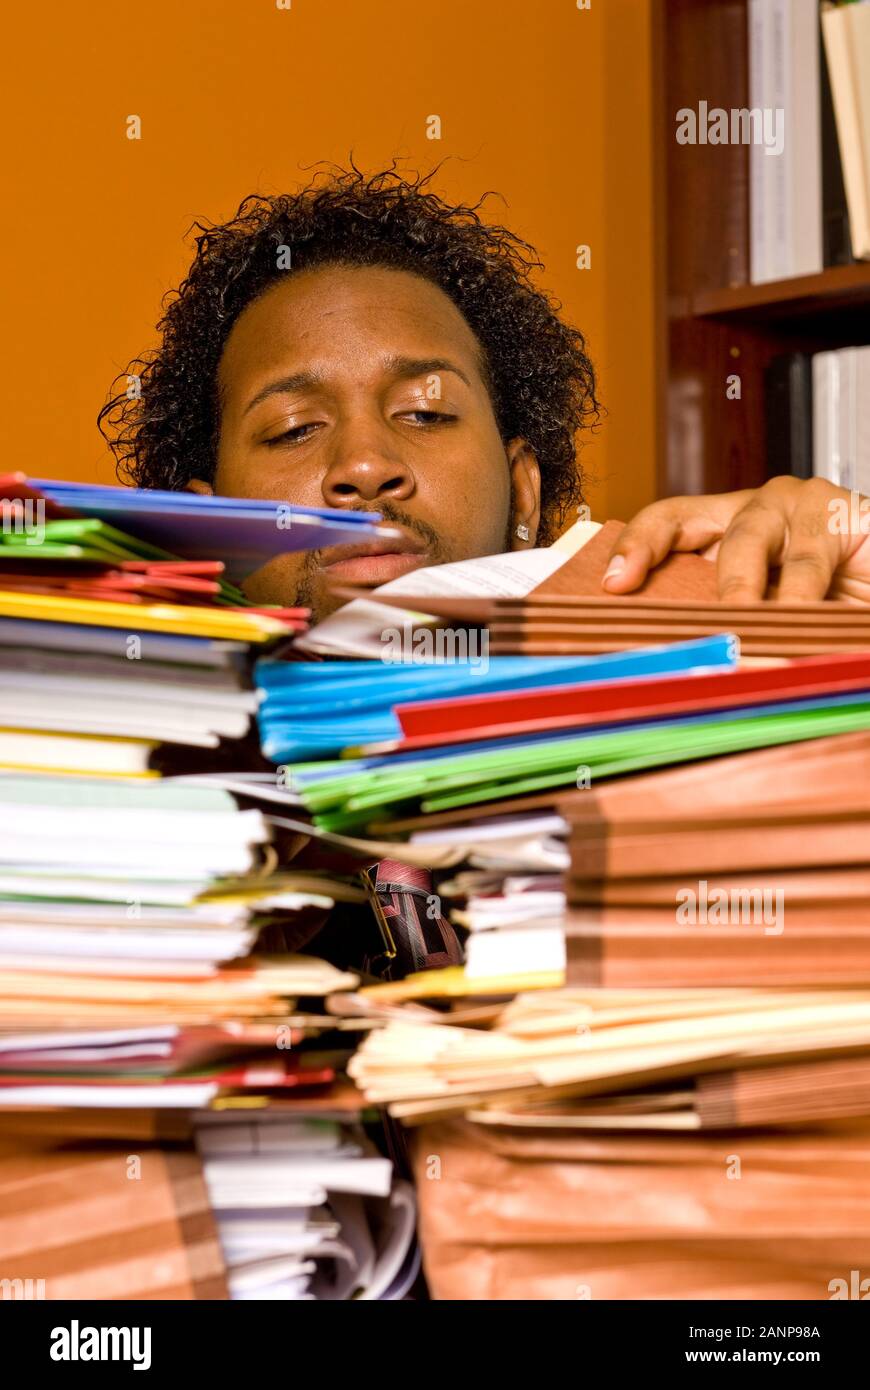 Over worked young man looking through a pile of colorful folders on his desk Stock Photo